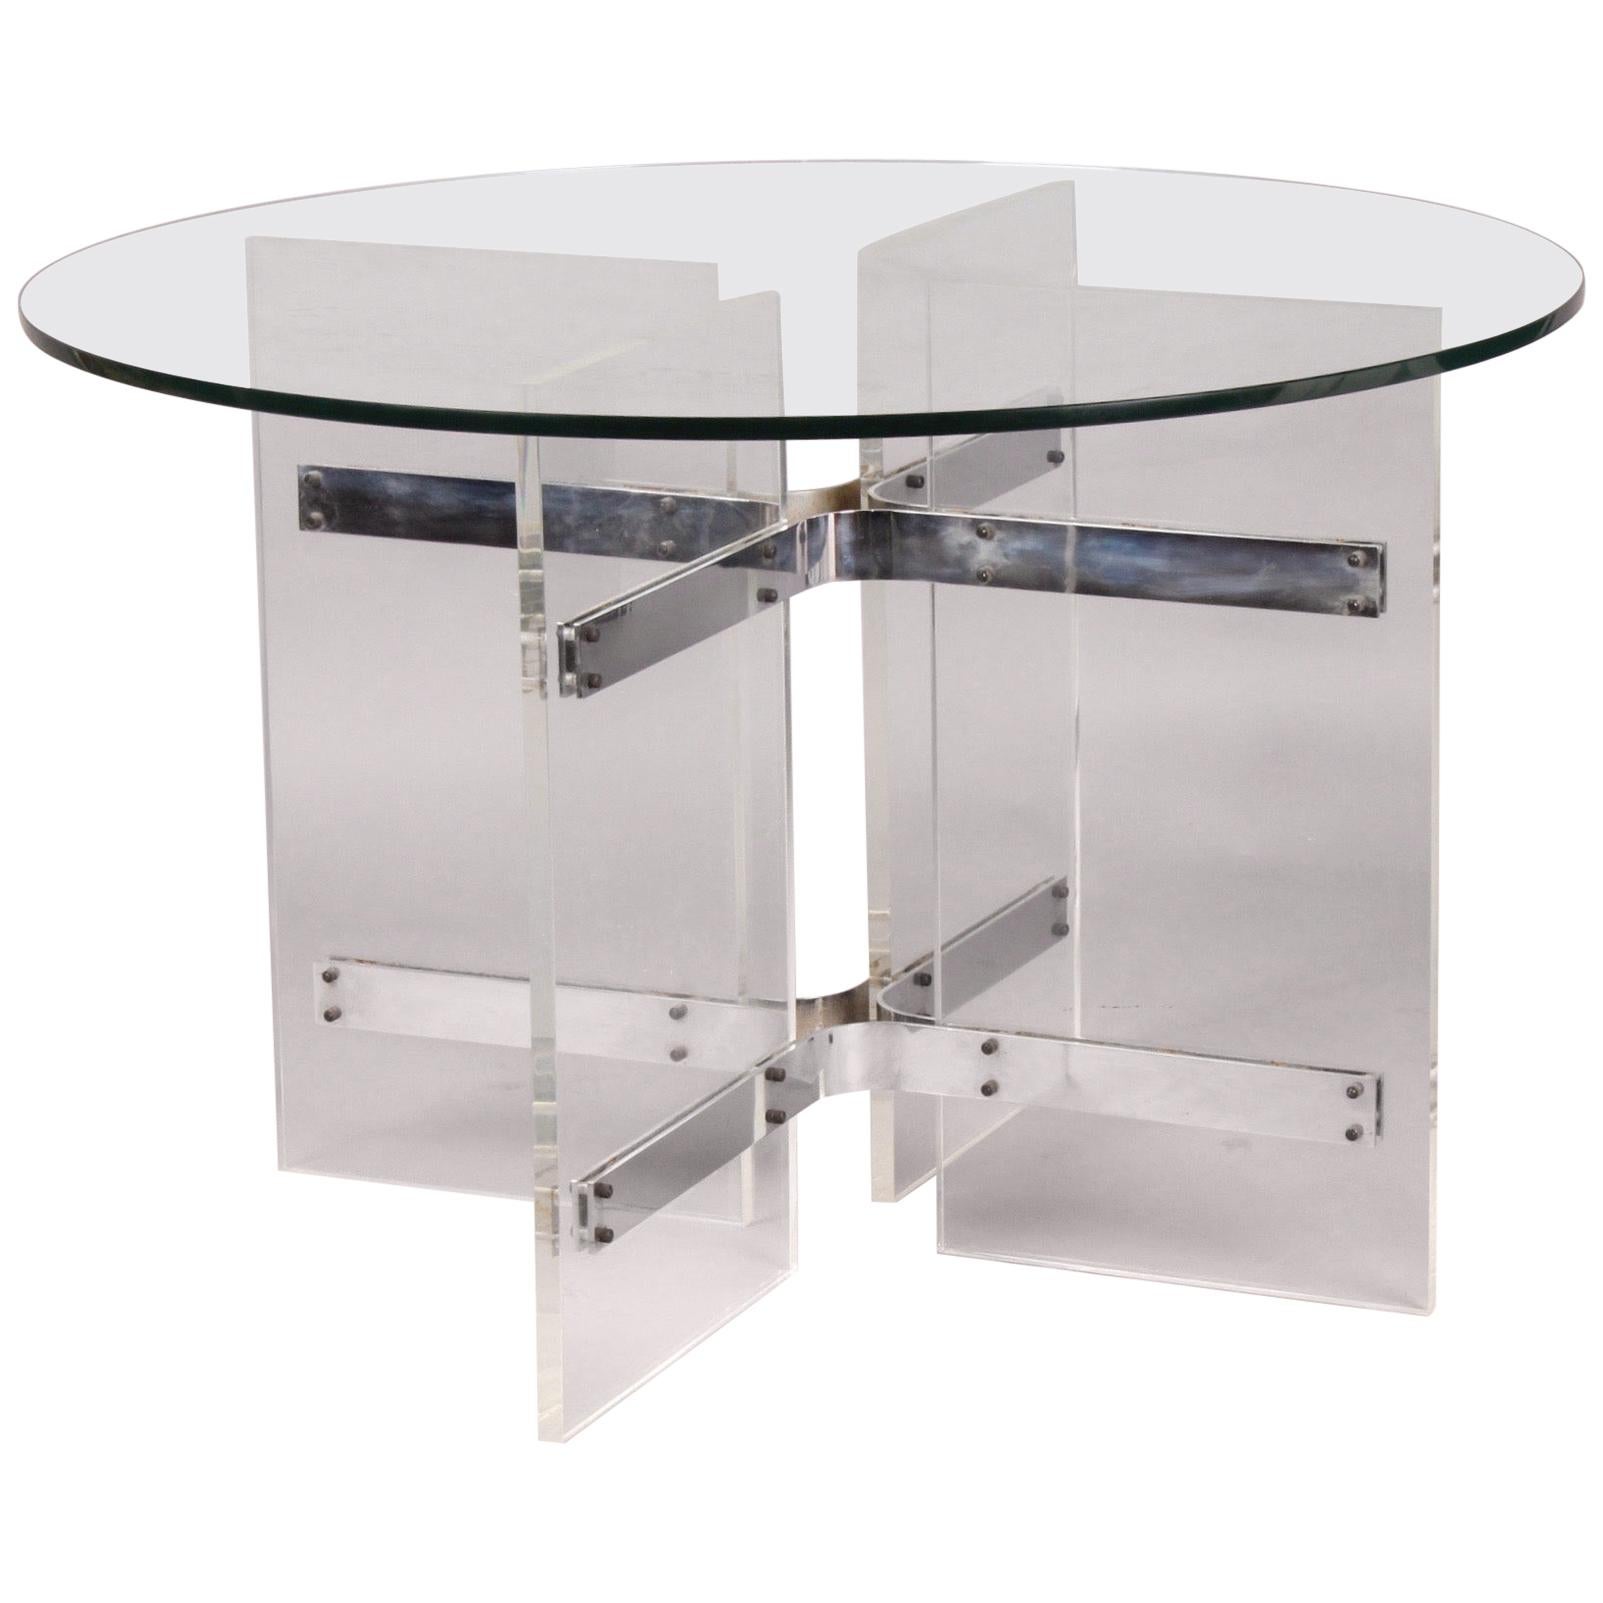 Plexiglass and Glass Guerdon or Dinning Table for 4 People